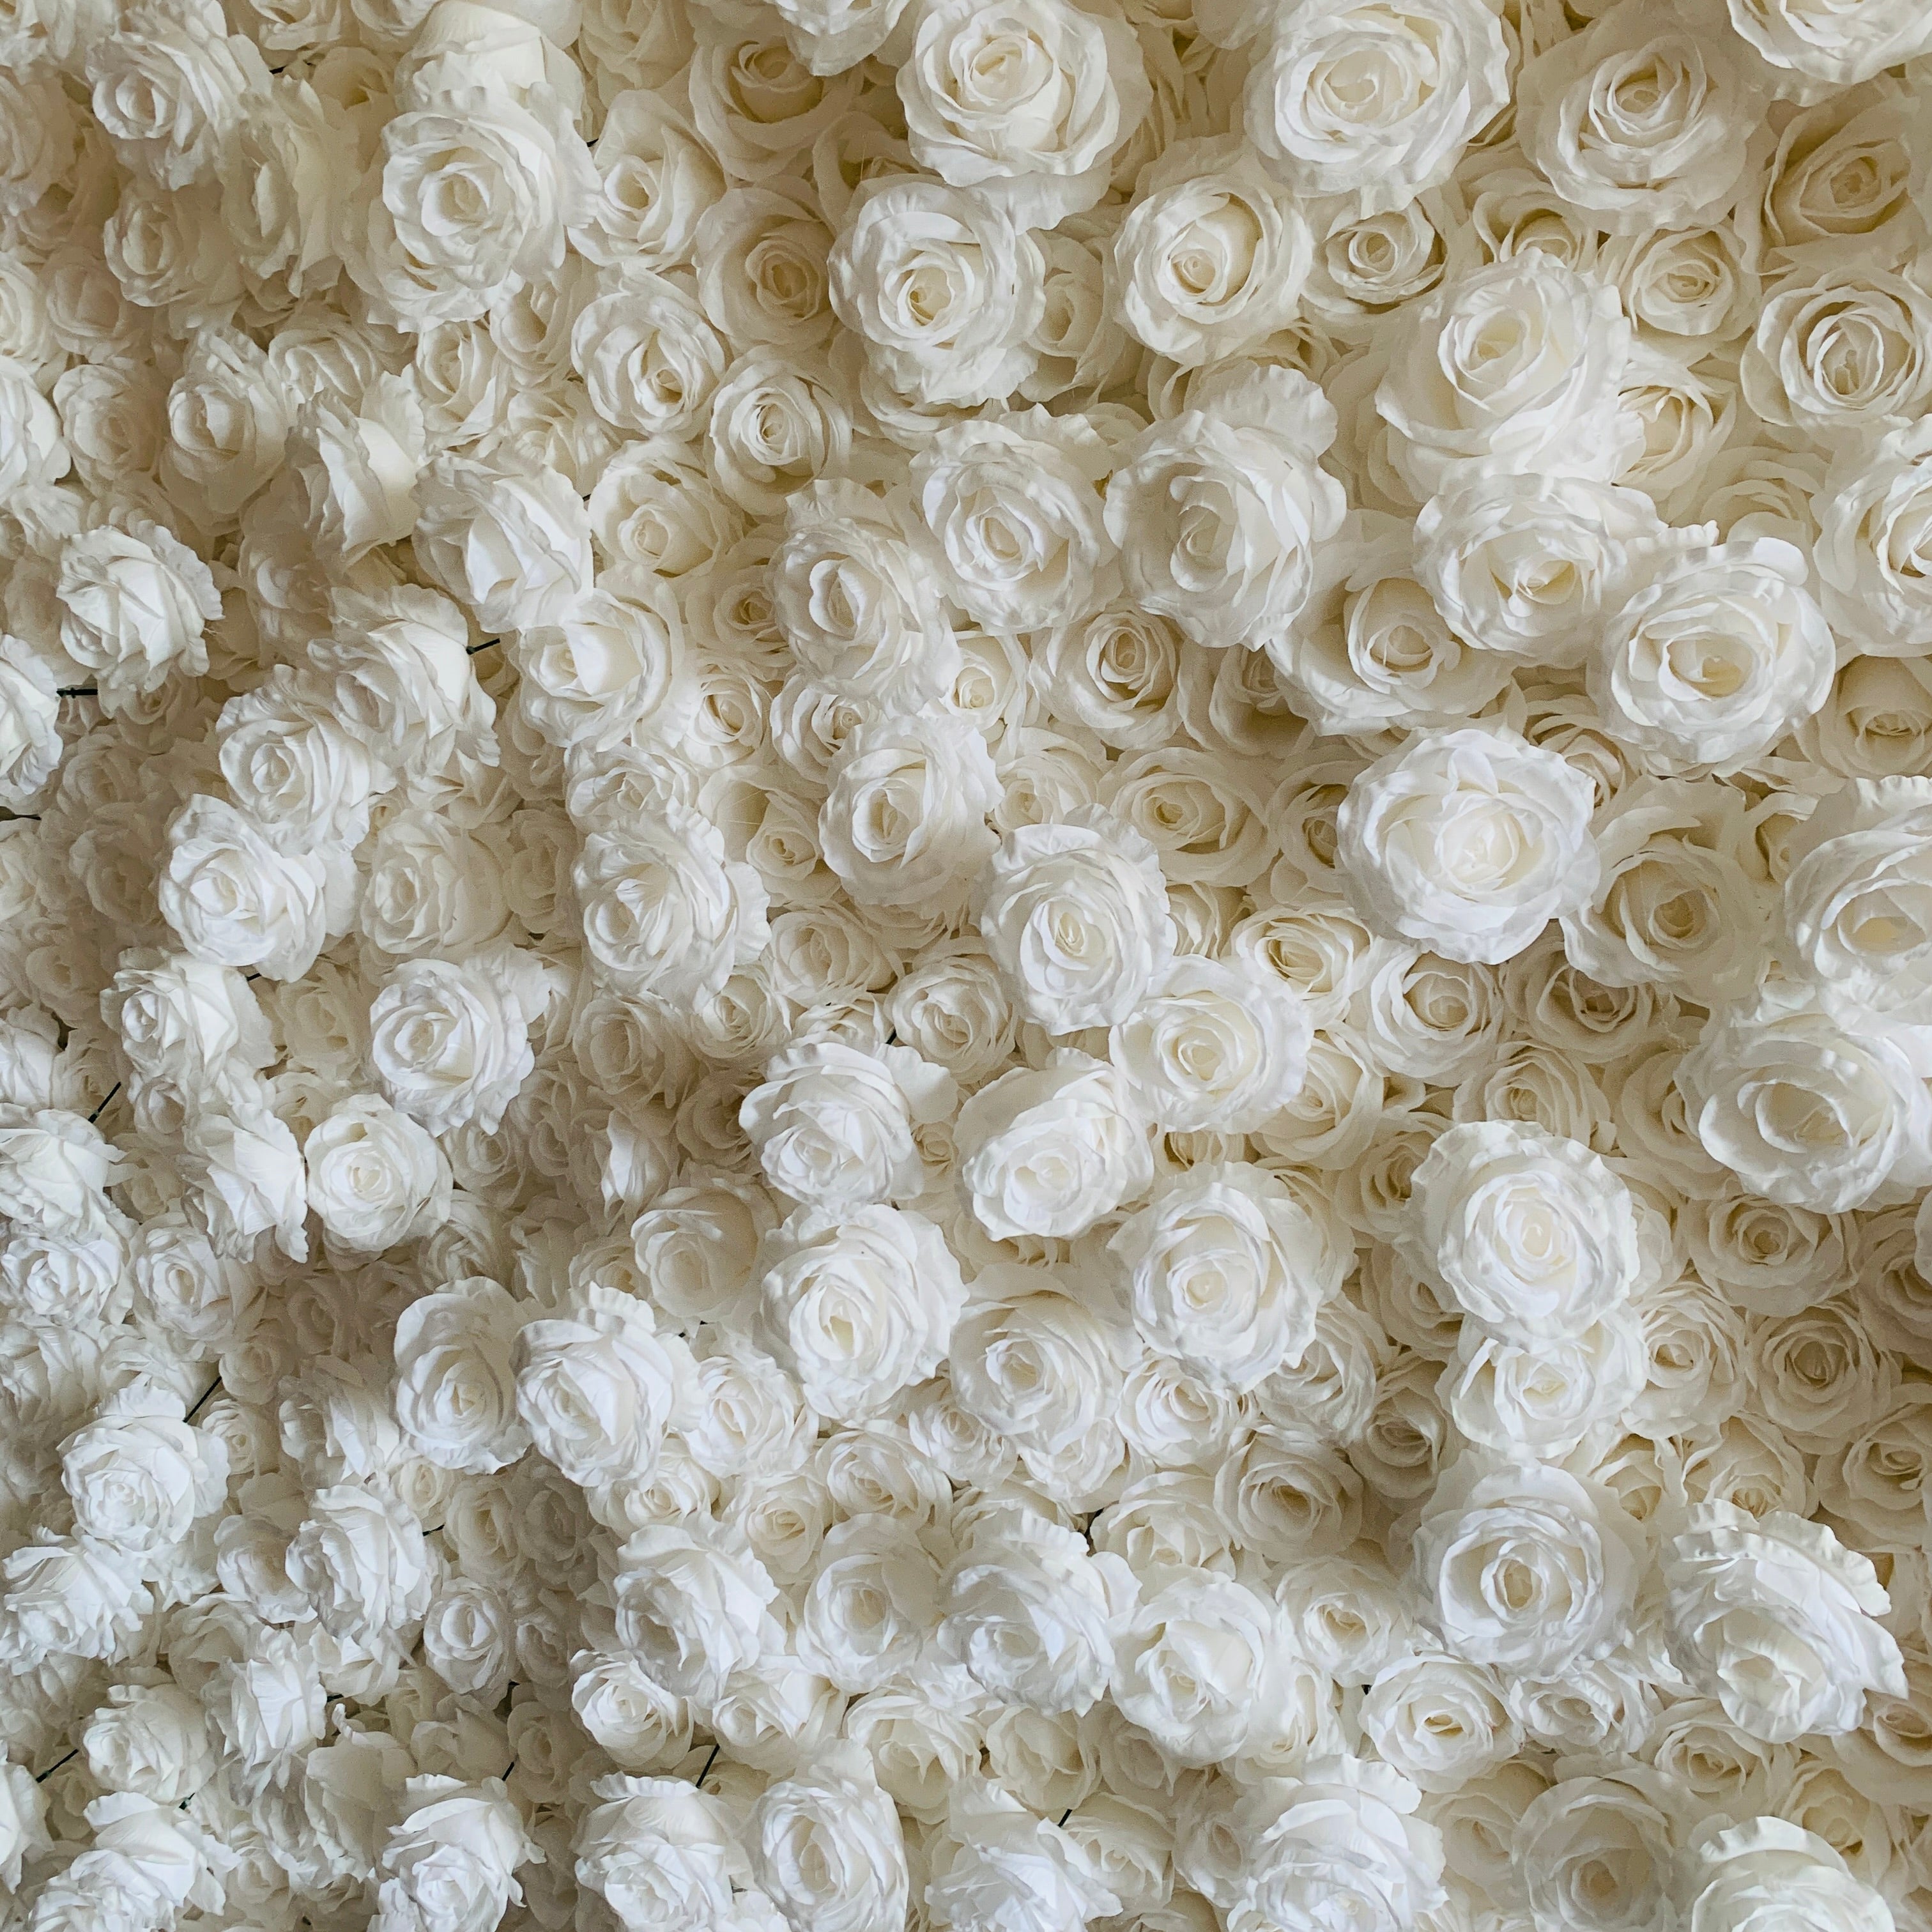 Flower Wall Pure White Rose Fabric Rolling Up Curtain Floral Backdrop Wedding Party Proposal Decor